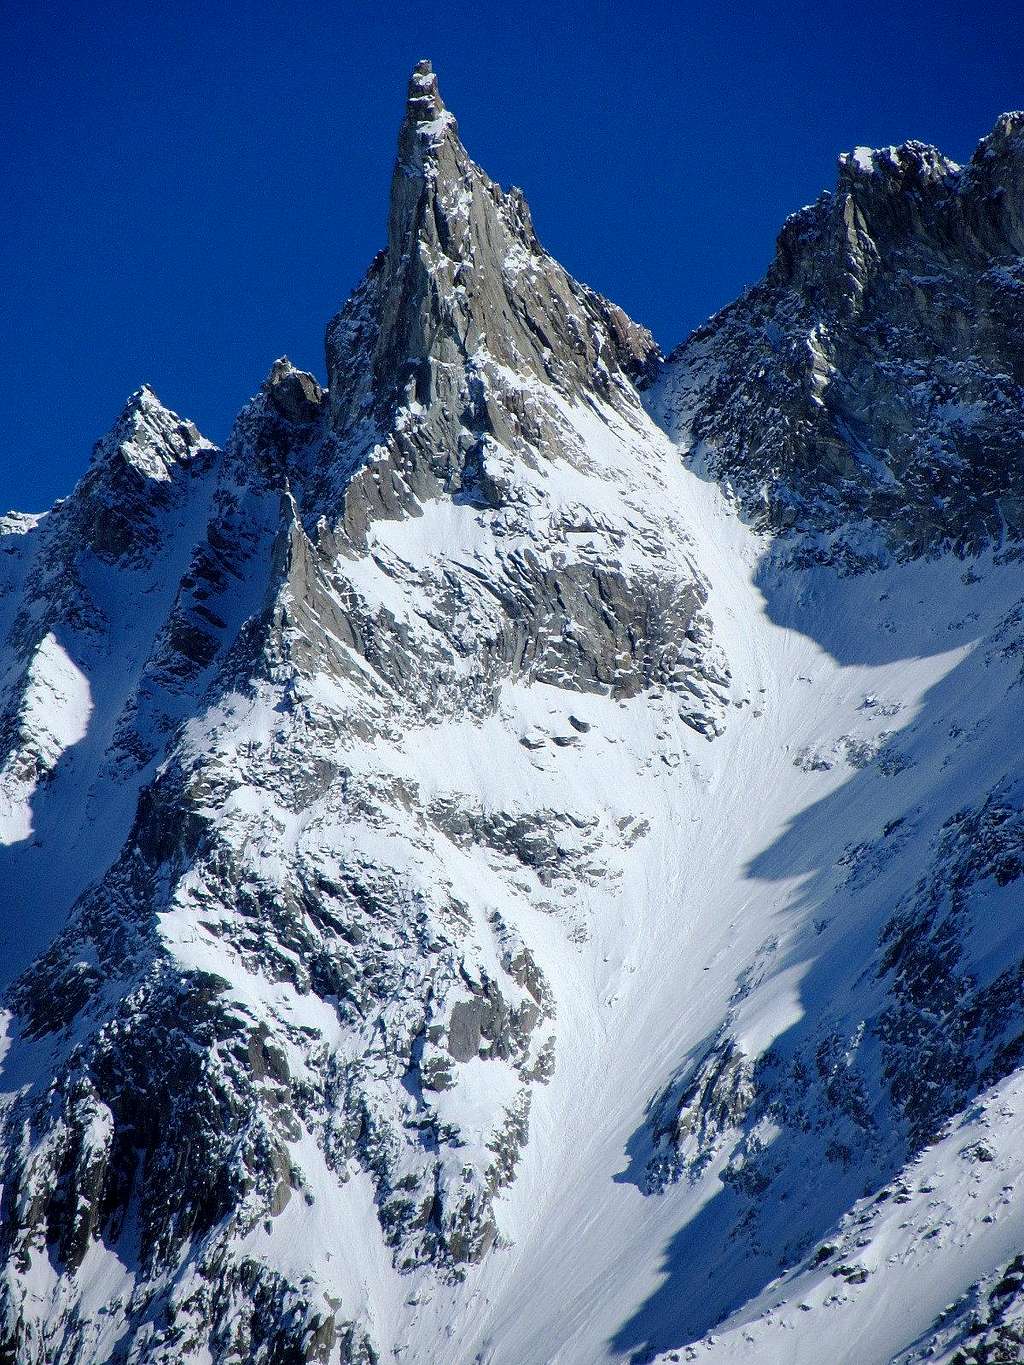 Zooming in on the Aiguille de la Tsa (3668m) from the slopes of Pigne d'Arolla